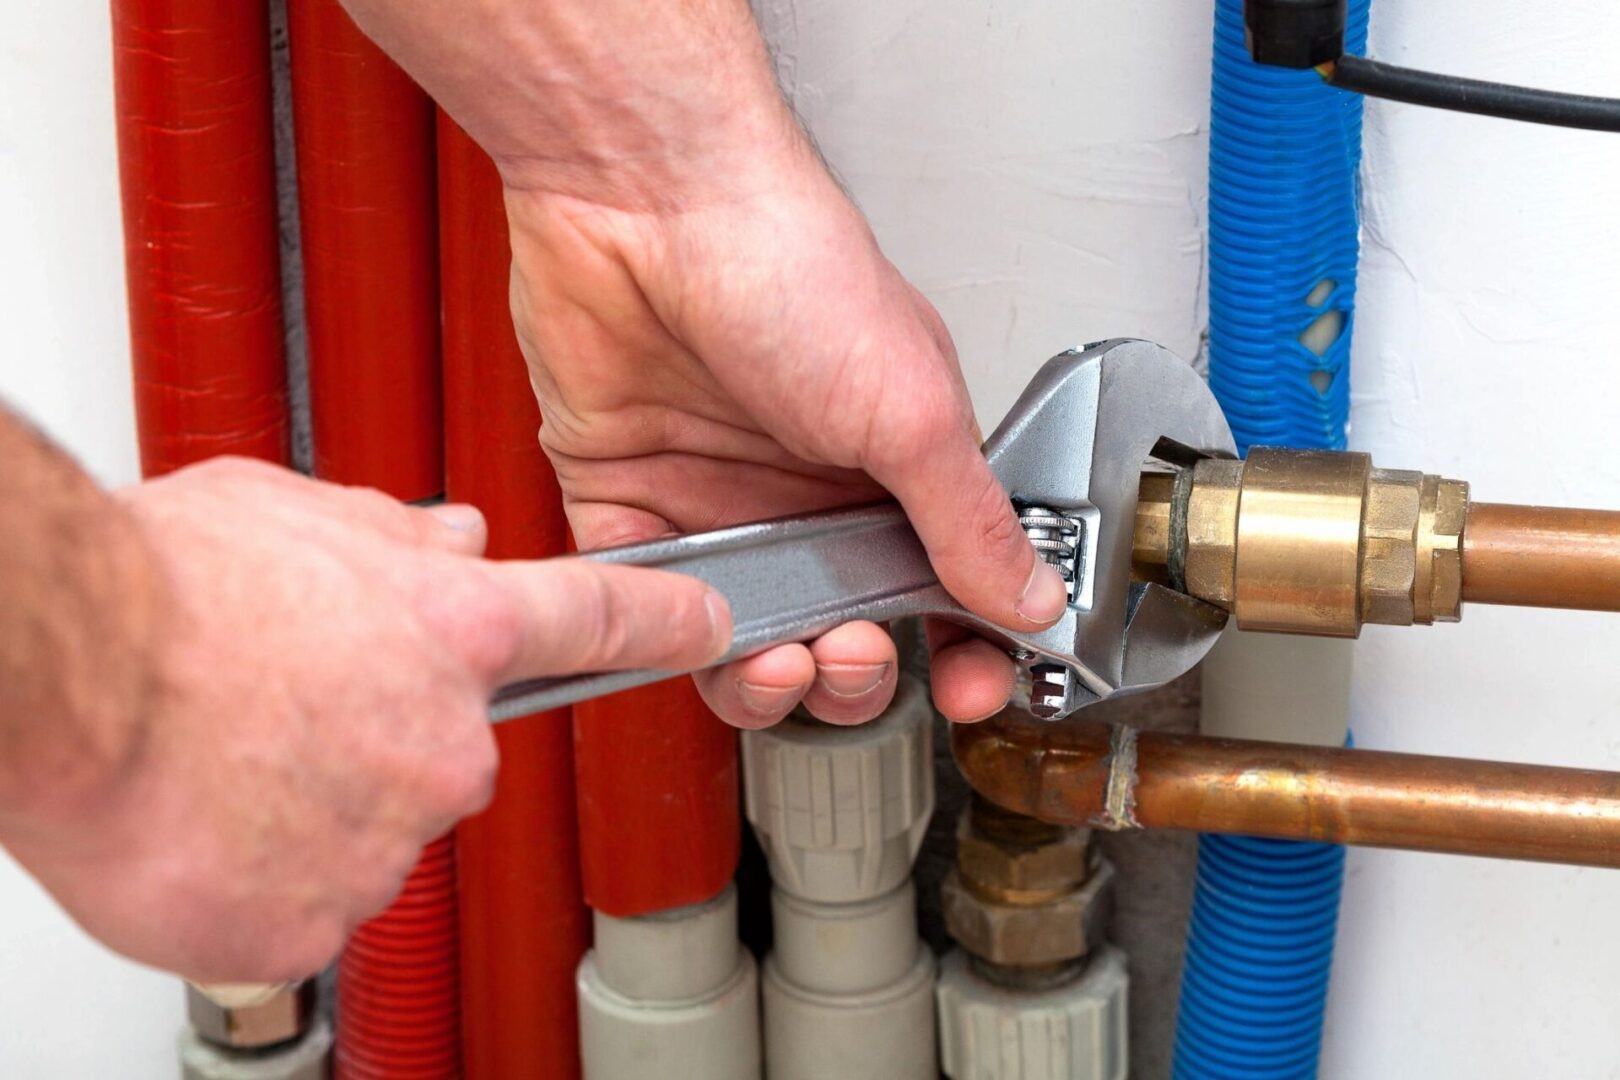 A person is holding a wrench over the water heater.